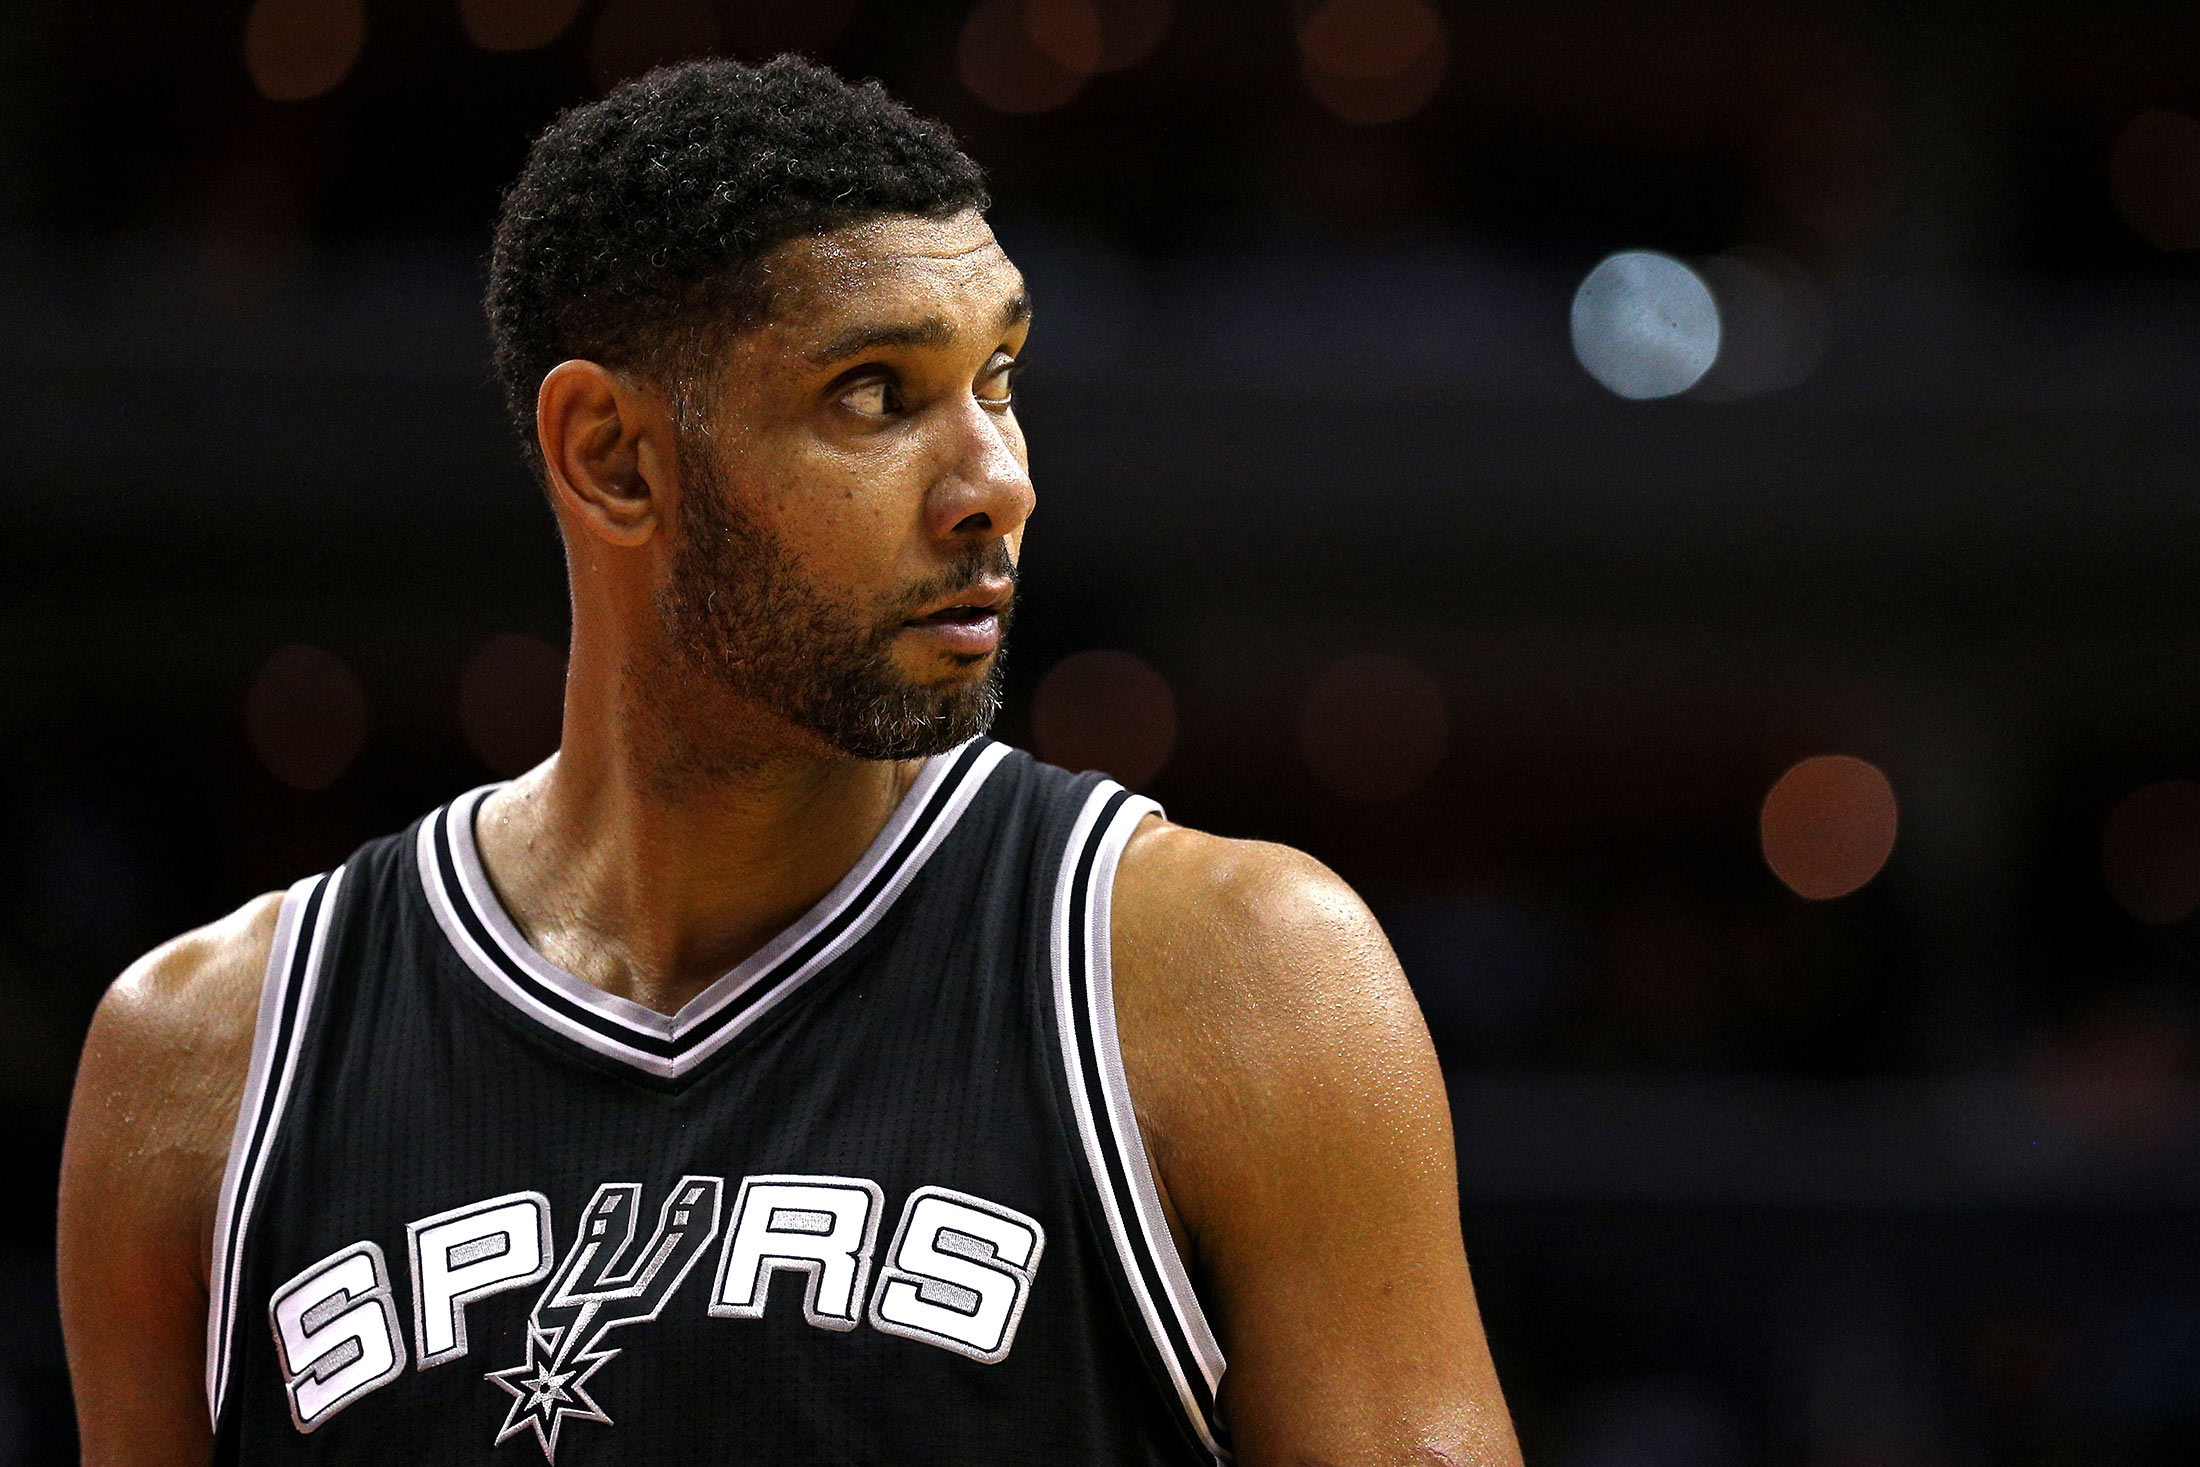 Spurs' Tim Duncan Retires After 19 N.B.A. Seasons and 5 Titles - The New  York Times